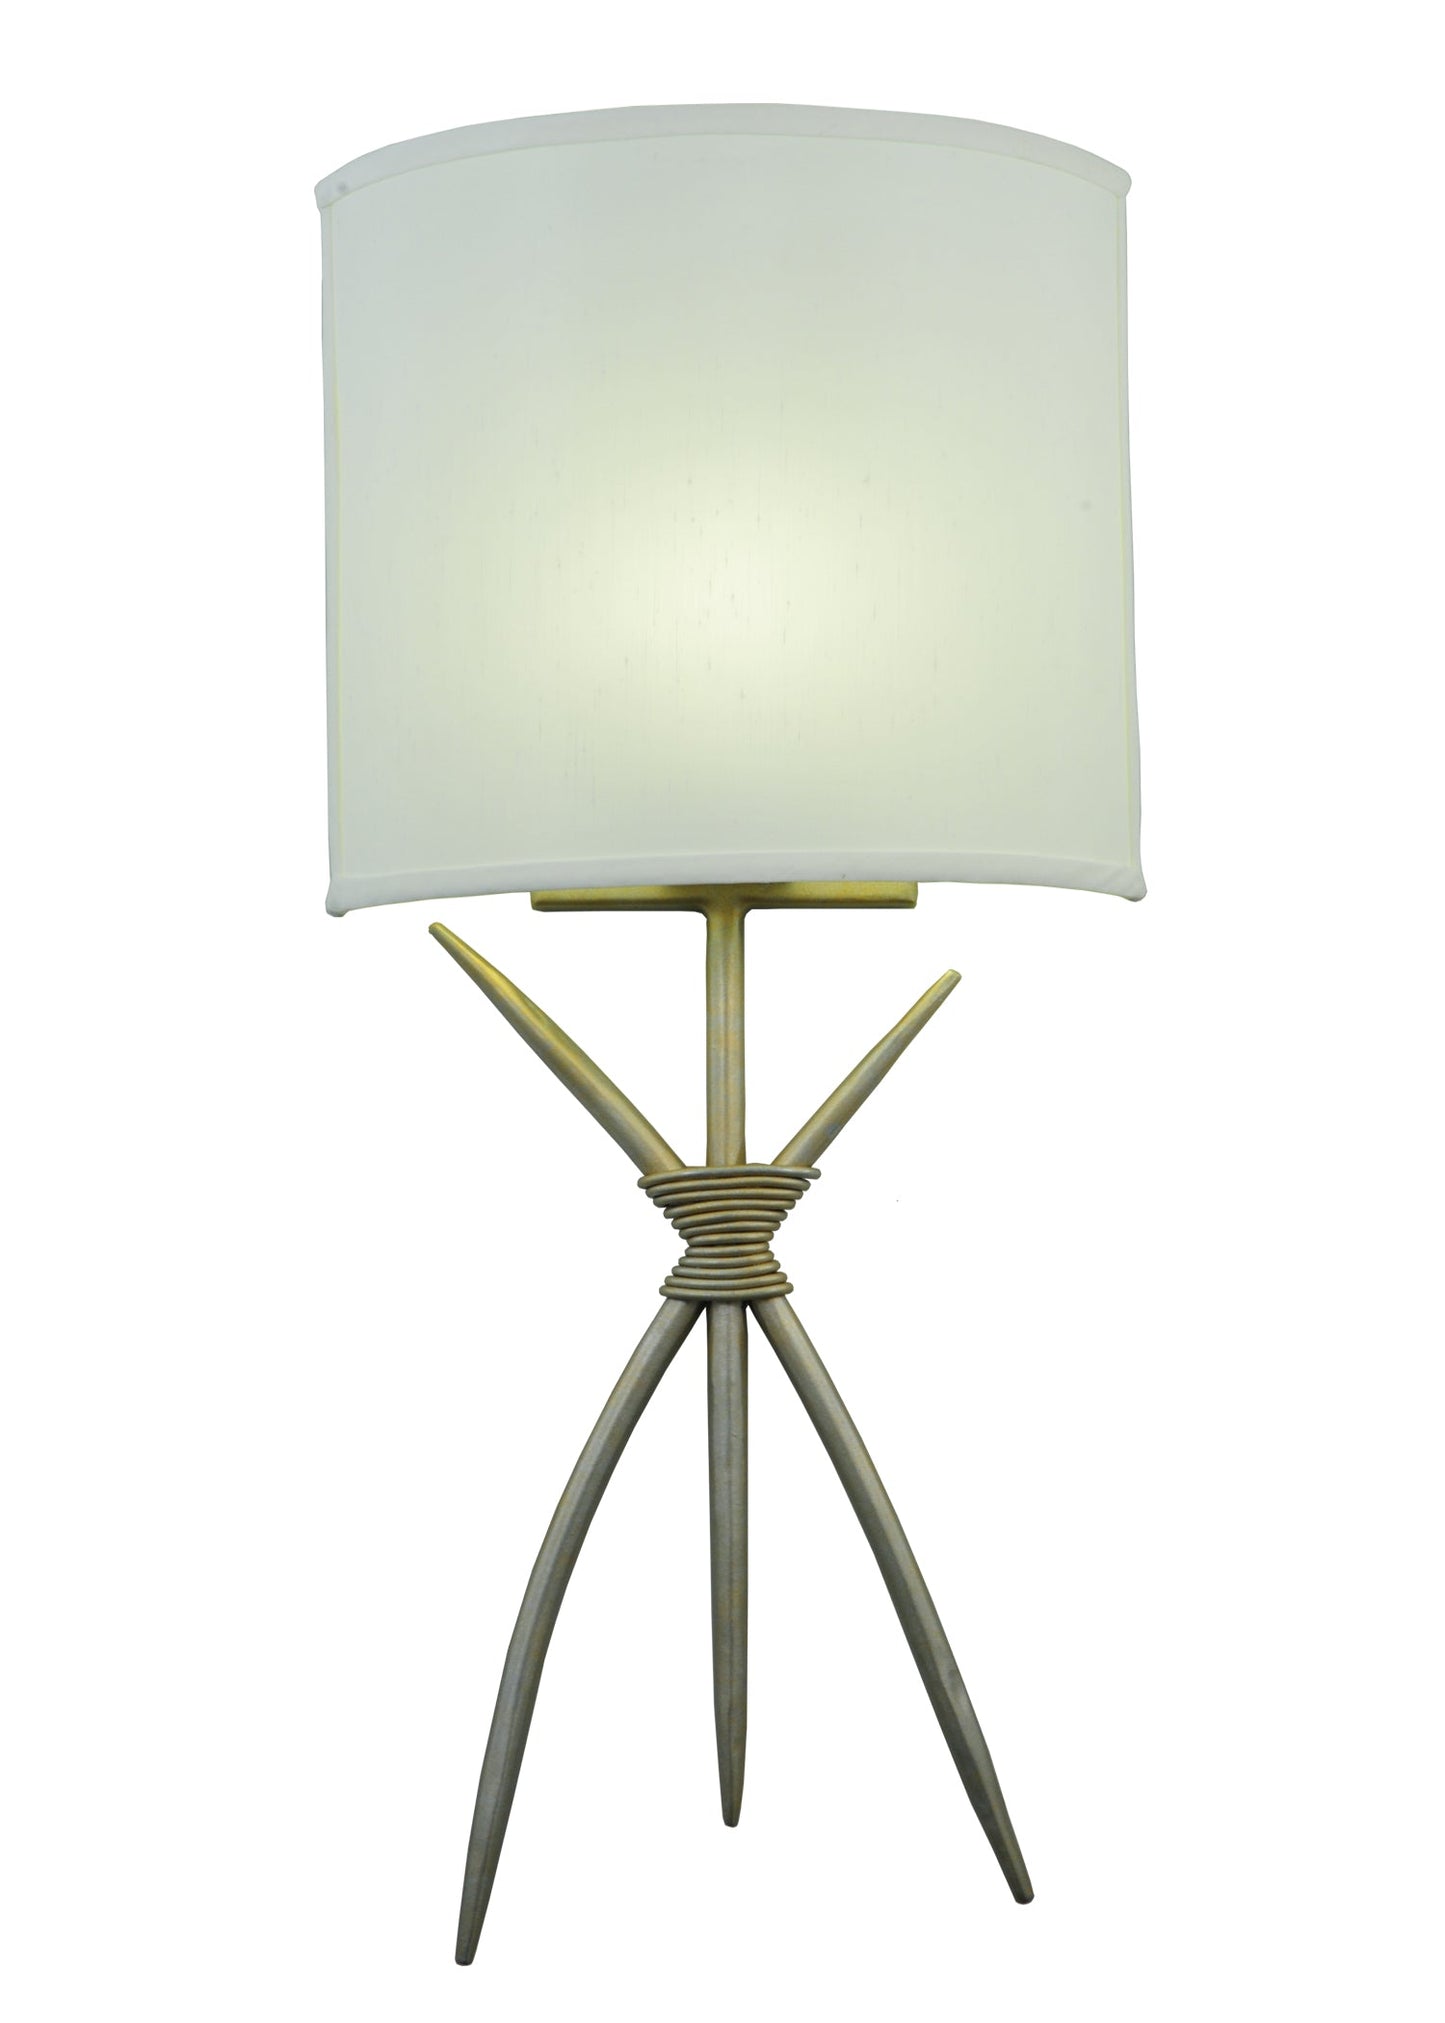 10.25" Sabre Wall Sconce by 2nd Ave Lighting